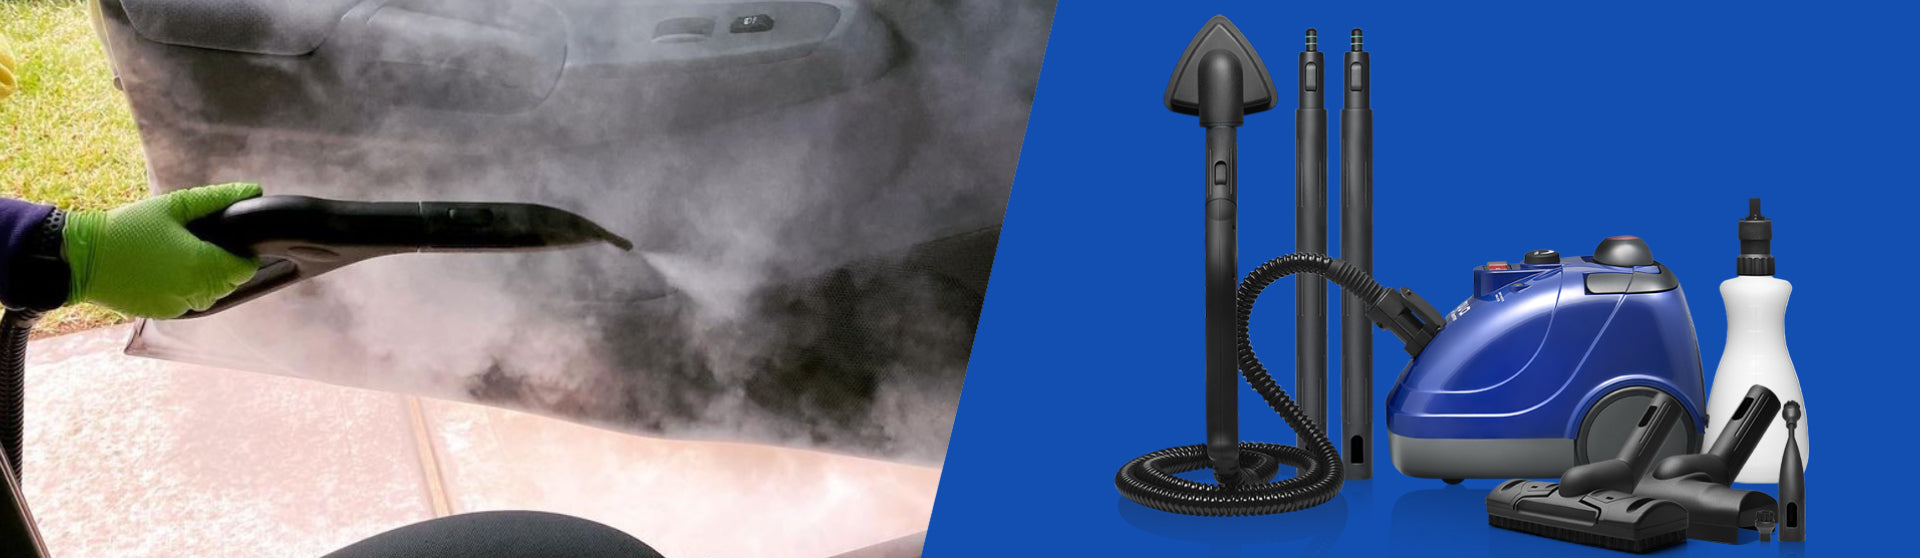 Revolutionize your steam cleaning with Aqua Pro Steamer!